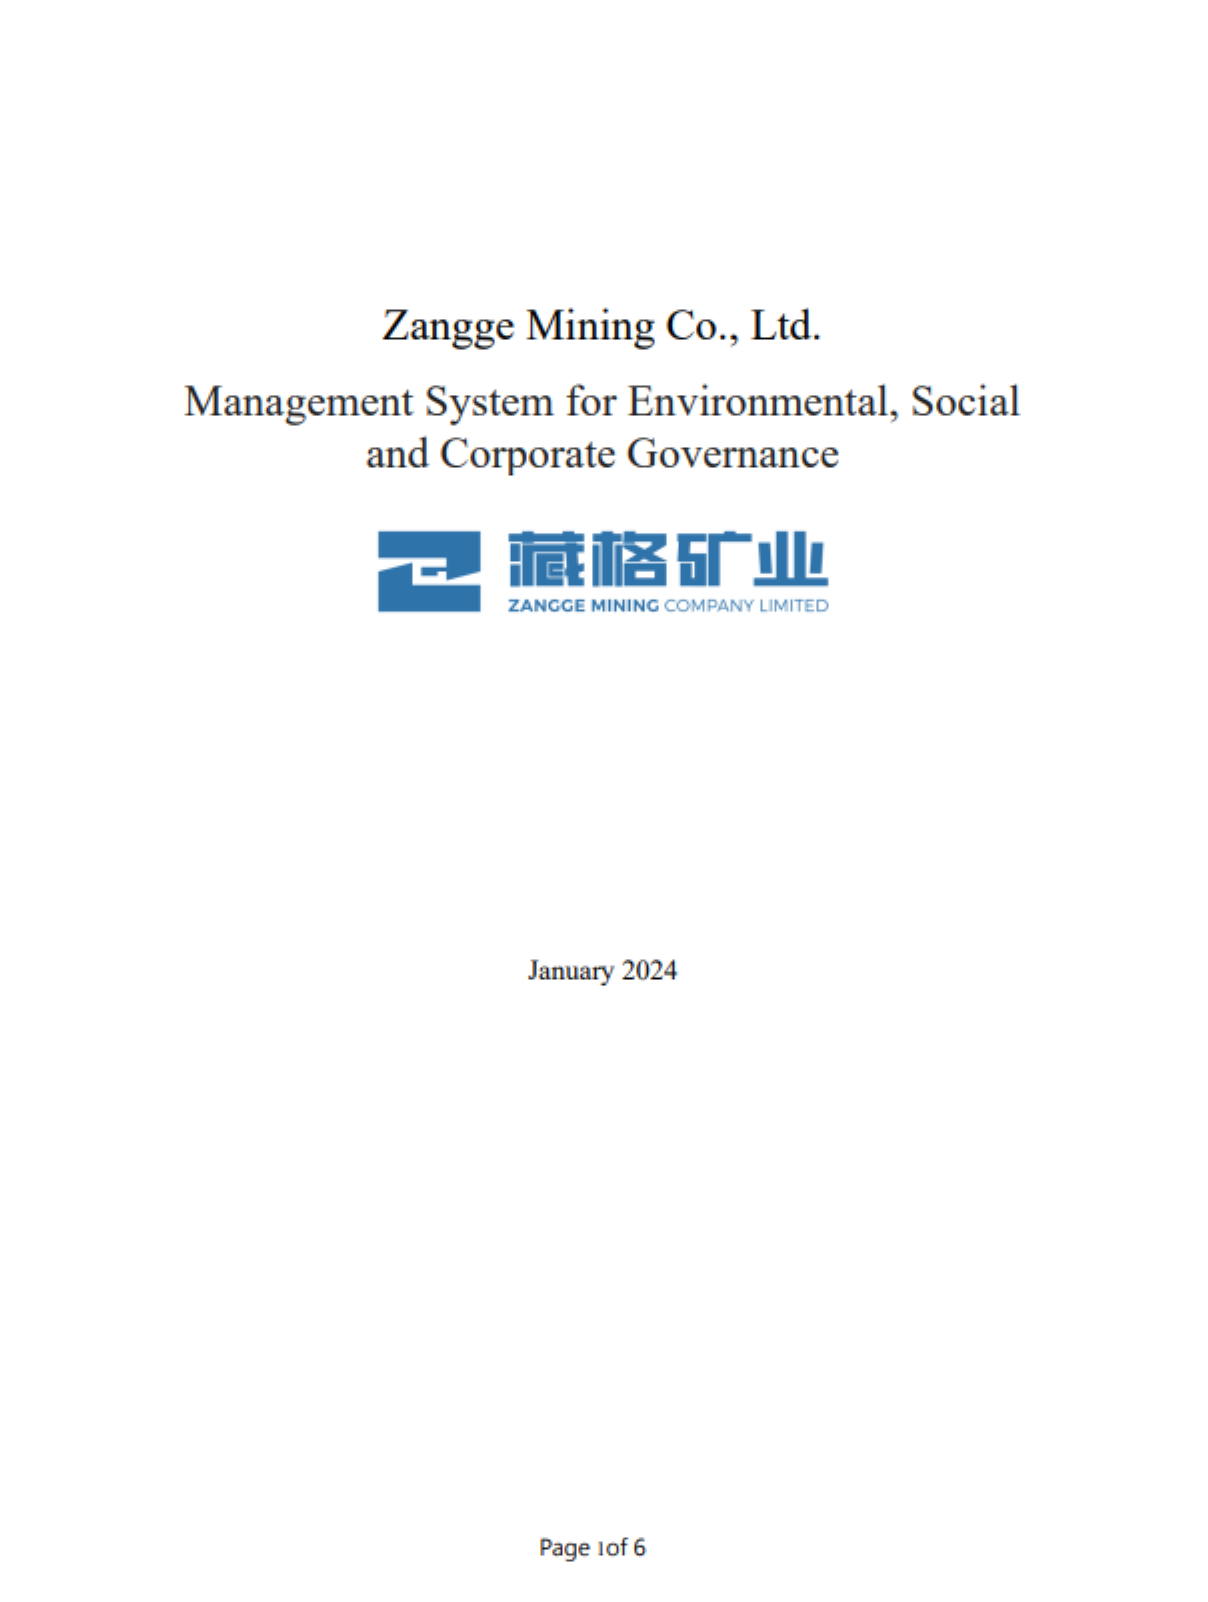 Zangge Mining Co., Ltd. Management System for Environmental, Social and Corporate Governance